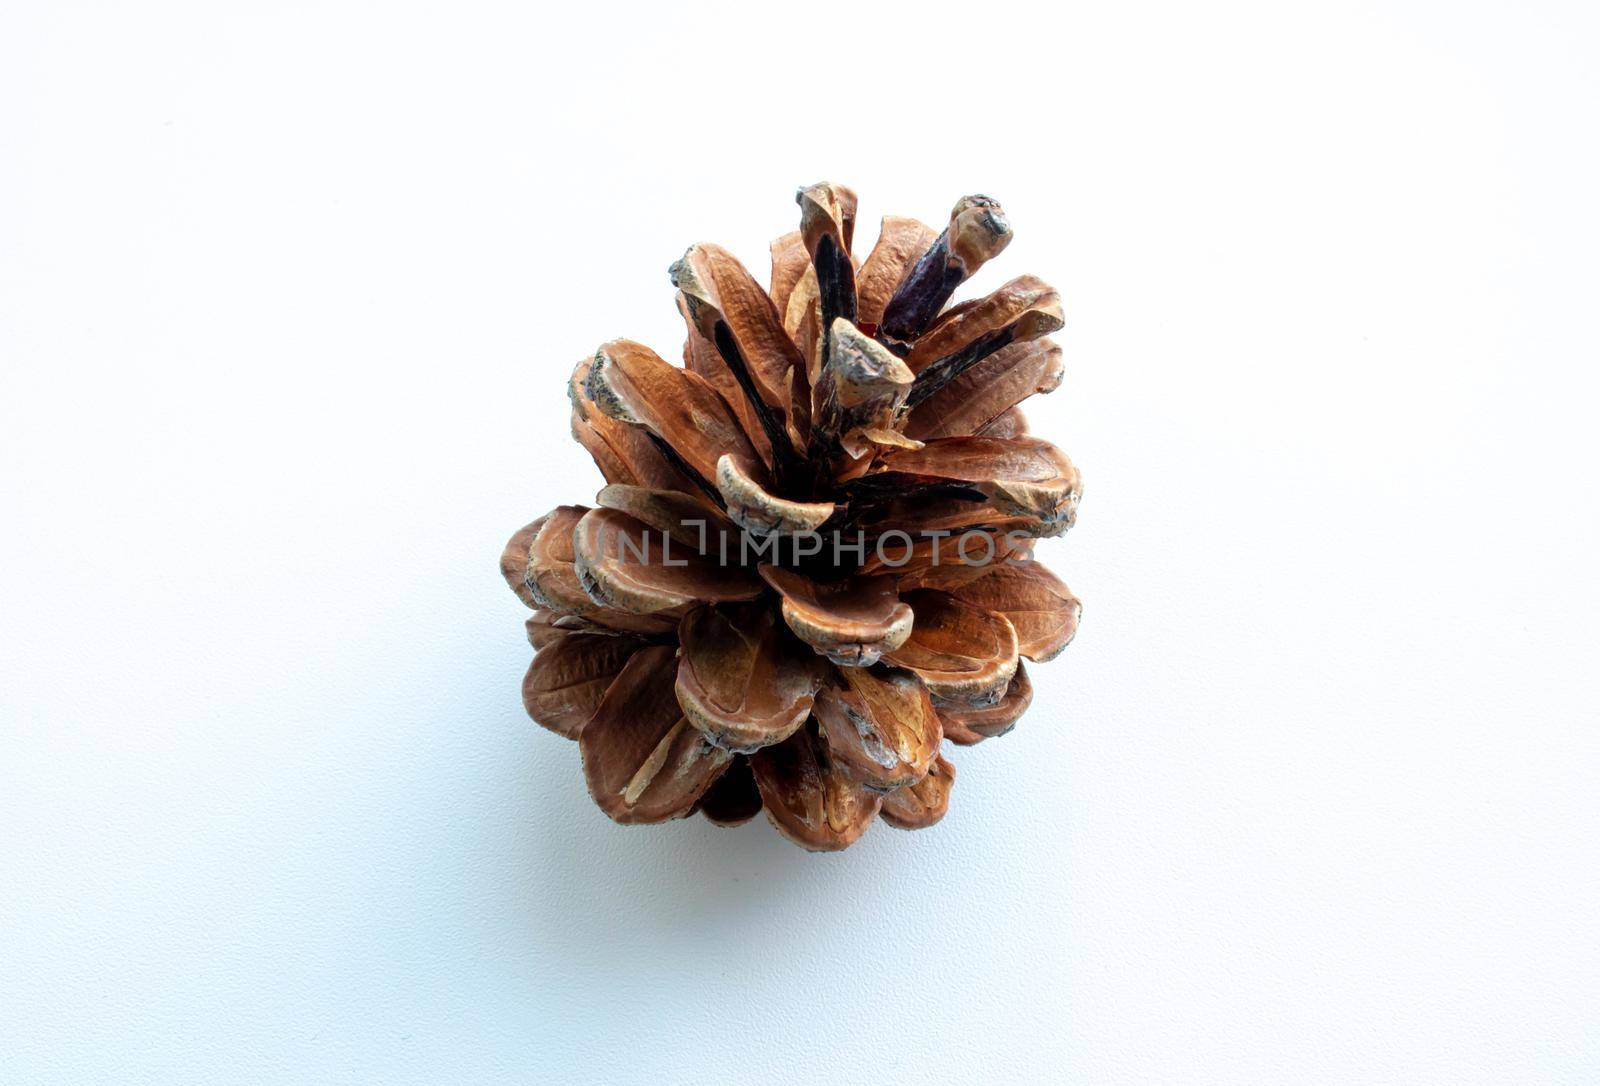 Time-lapse of opening pine cone 5x1 in PNG format with ALPHA transparency channel isolated on white background. by lapushka62